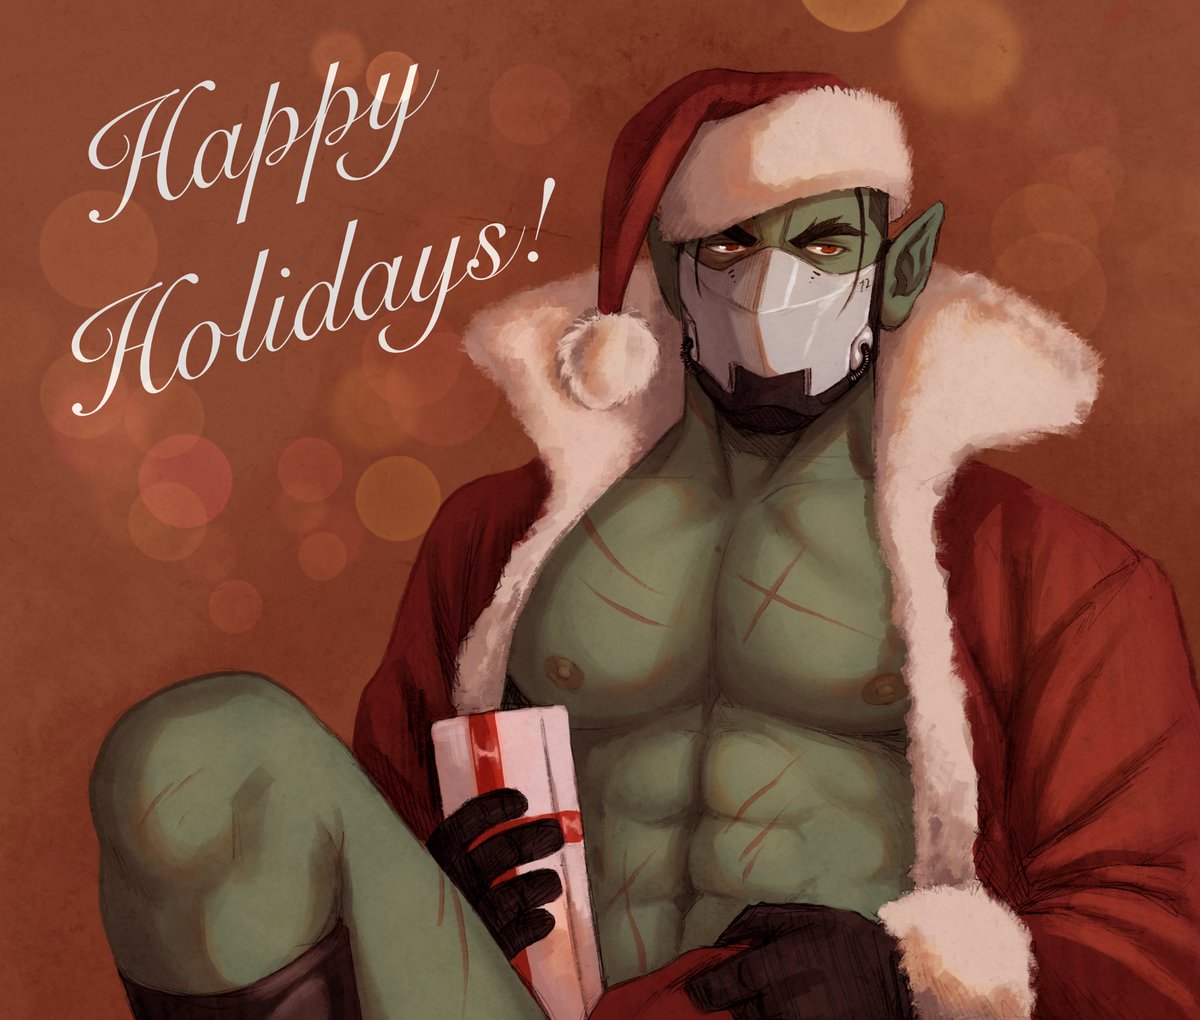 Happy Holidays! 🎄✨ You guys really seem to like Vereor, so I redrew that one postcard from Tom of Finland with him for this occasion. Hopefully it's not too risque!